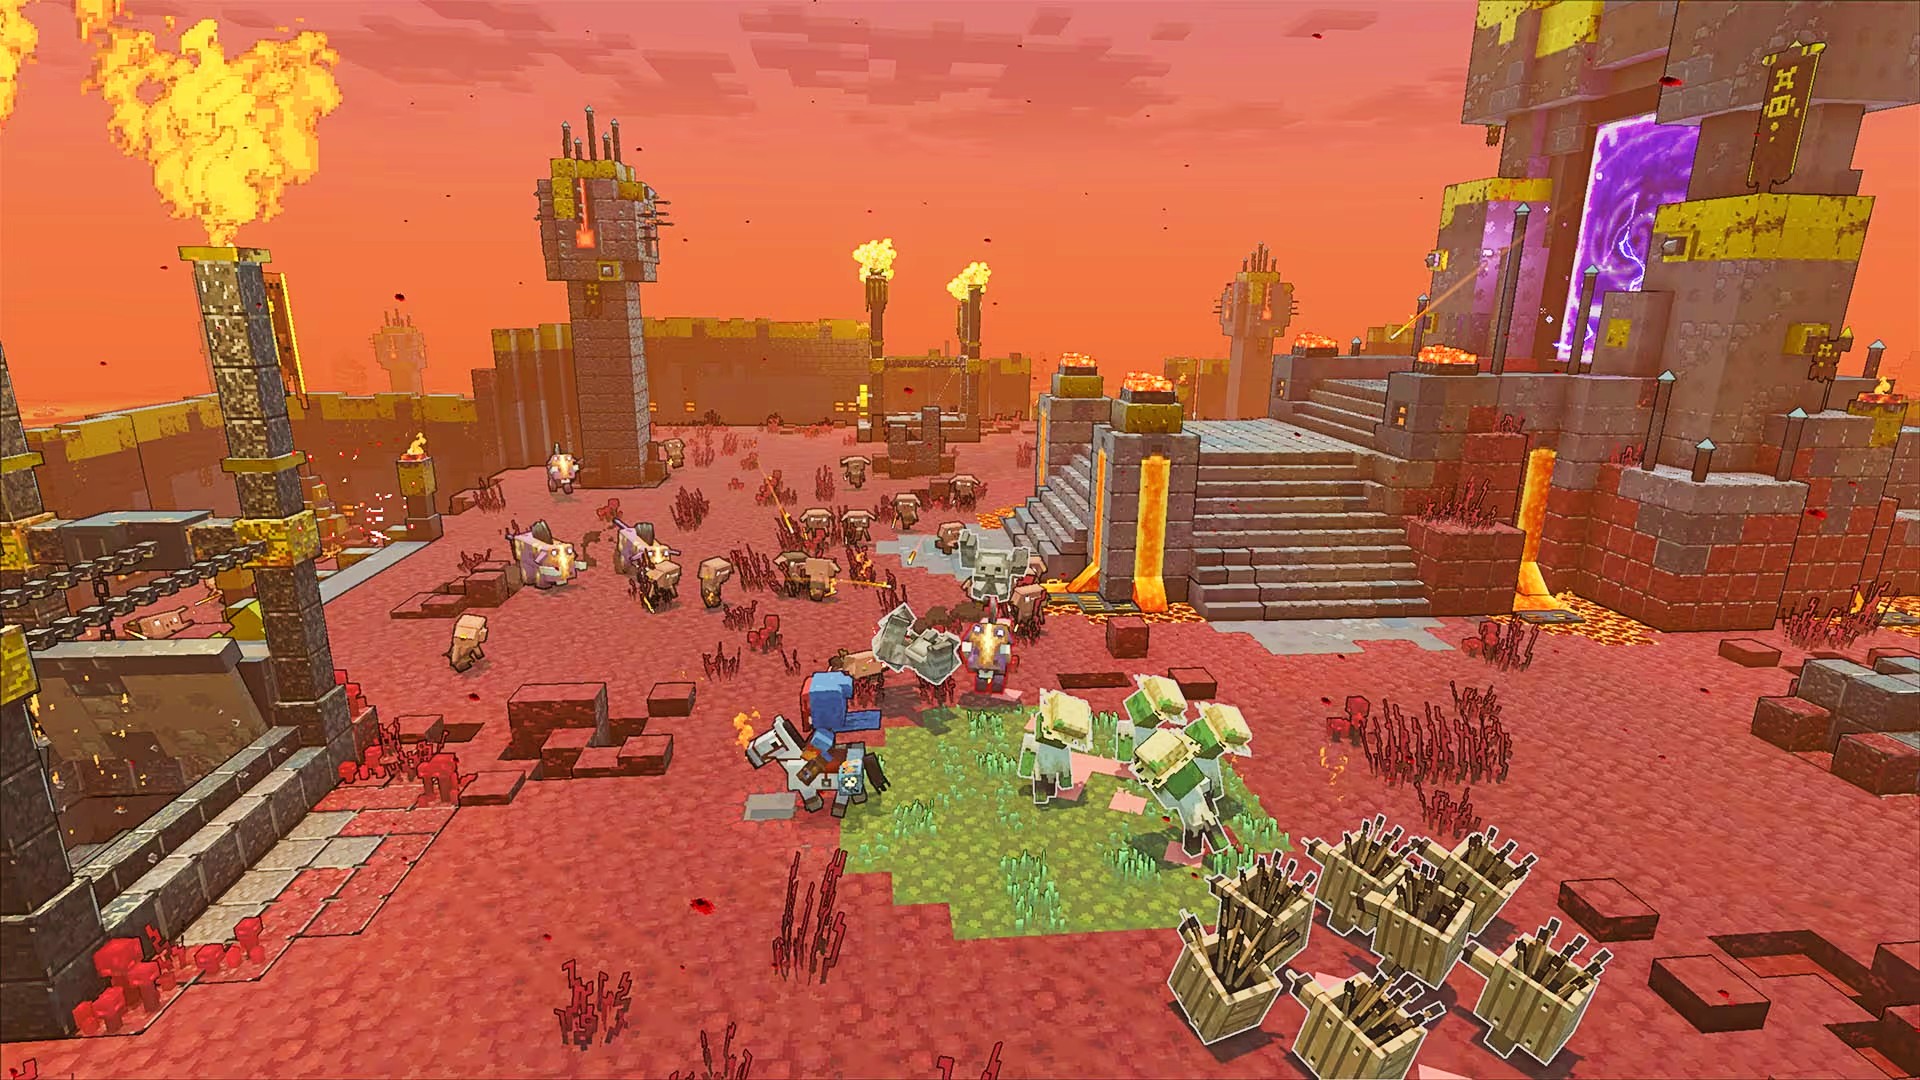 Play Minecraft-ish MMO Online for Free on PC & Mobile